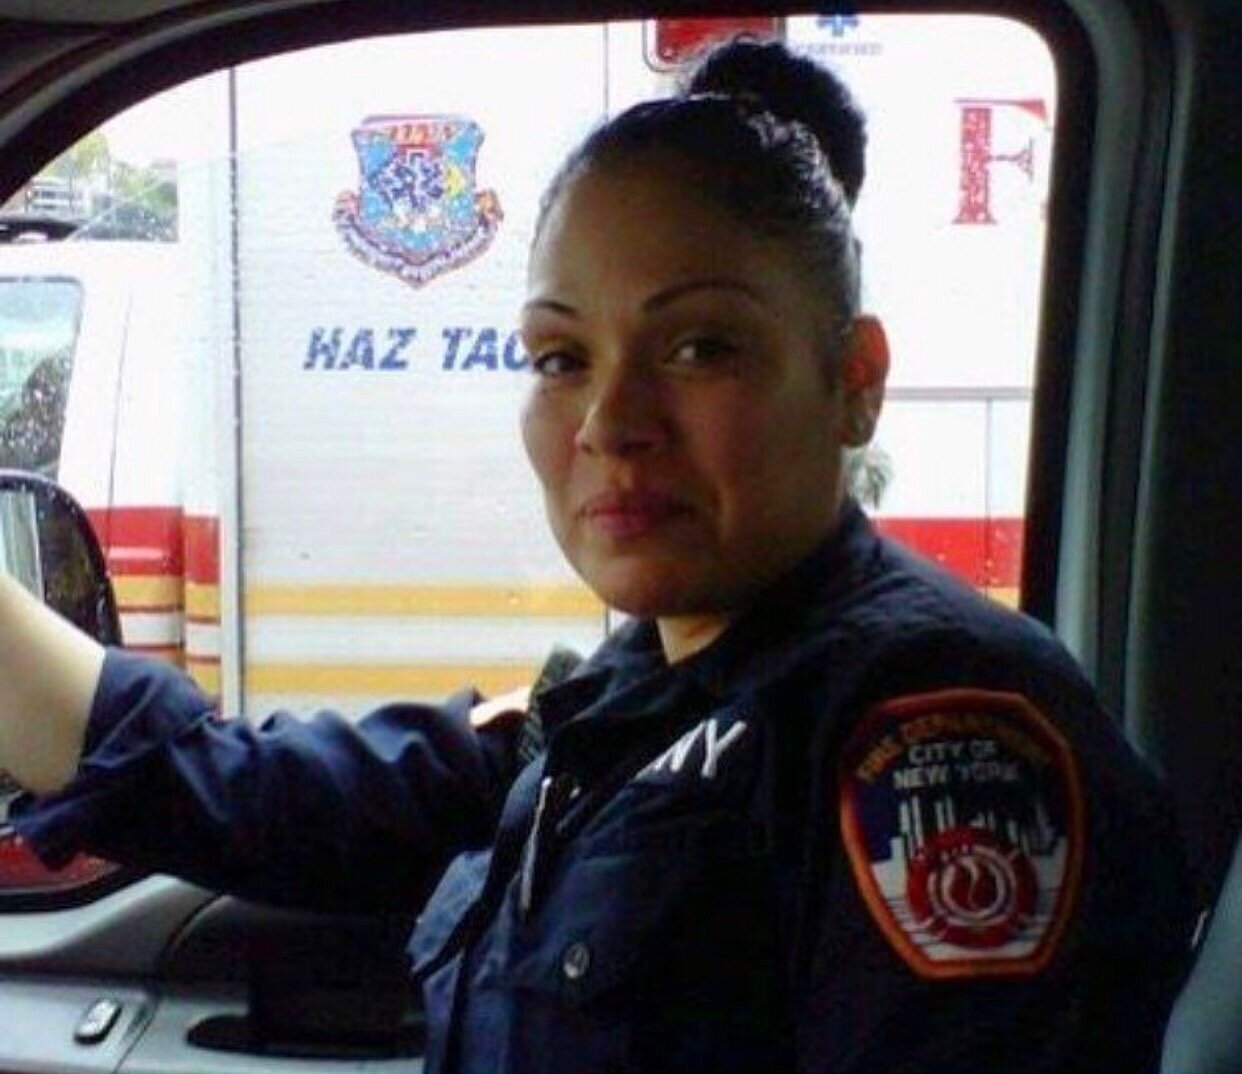 Emergency Medical Technician Yadira Arroyo, 44, was killed in March 2017 when she was run over by a man who hijacked her rig in the Bronx’s Soundview neighborhood. A jury on Wednesday convicted Jose Gonzalez of first-degree murder.